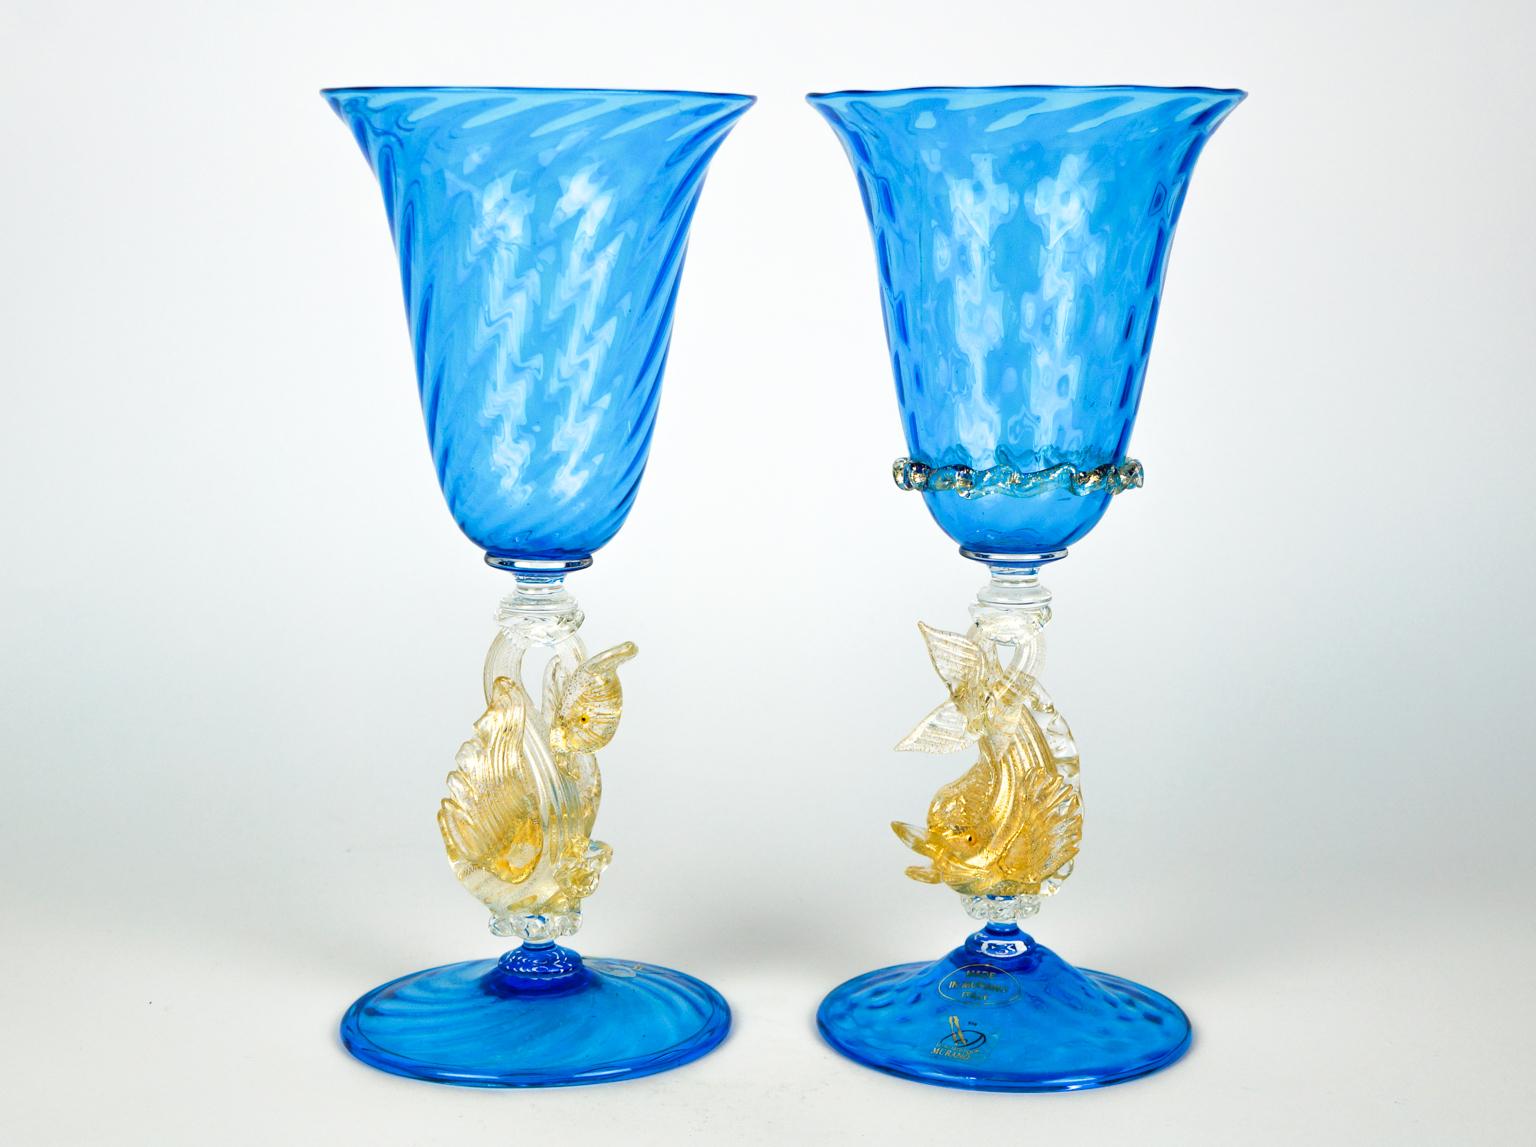 Elegant pair of aquamarine glass goblets with dolphin and swan in 24-carat gold leaf. 
The objects made of Murano glass are all handmade by our famous Murano artisans, making our works unique and inimitable. 

The goblets was made in the Murano